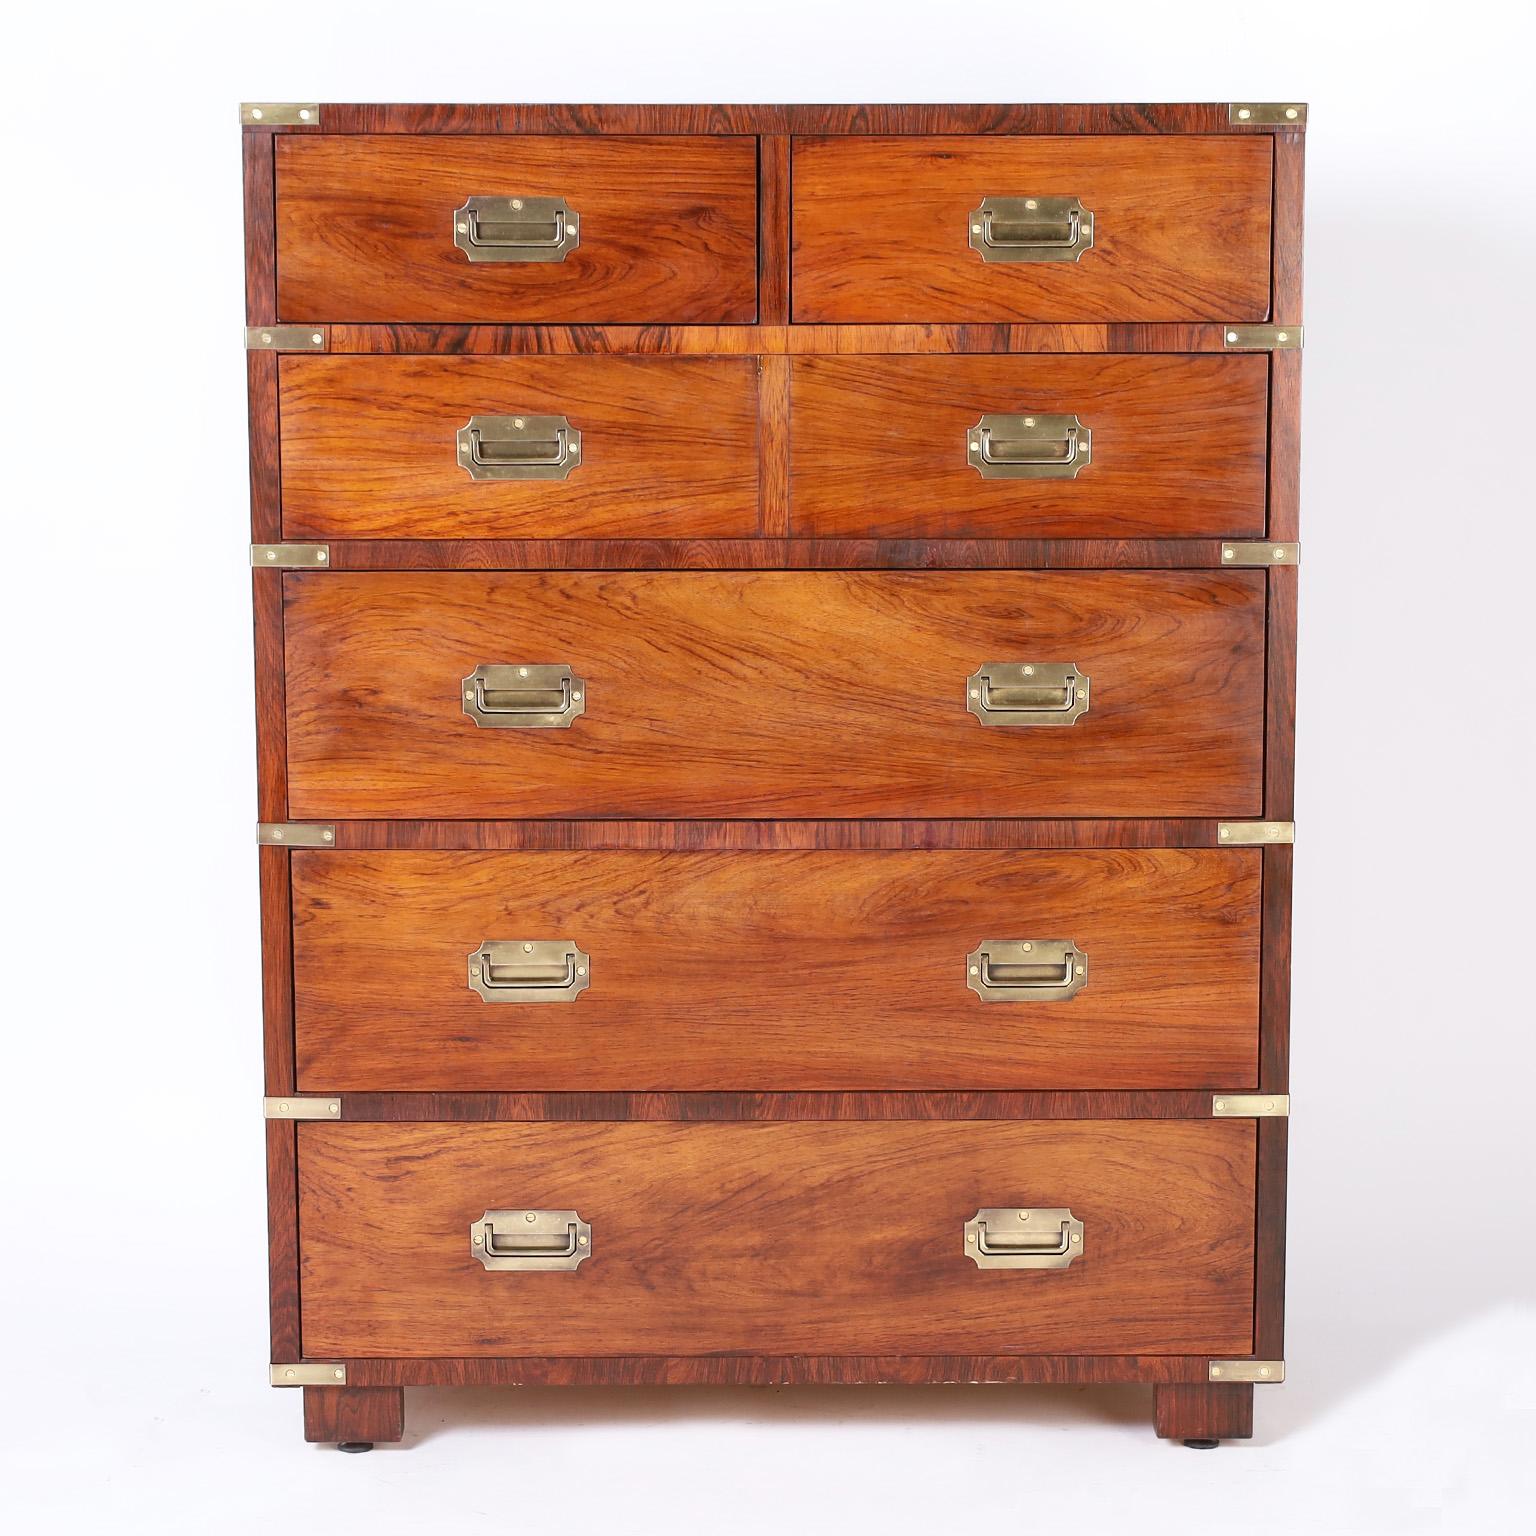 Mid century British colonial style tall chest crafted in rosewood with dramatic wood grains, two small drawers at the top and four below, brass campaign hardware, and block feet with adjustable pads. Perfect combination of modern and traditional